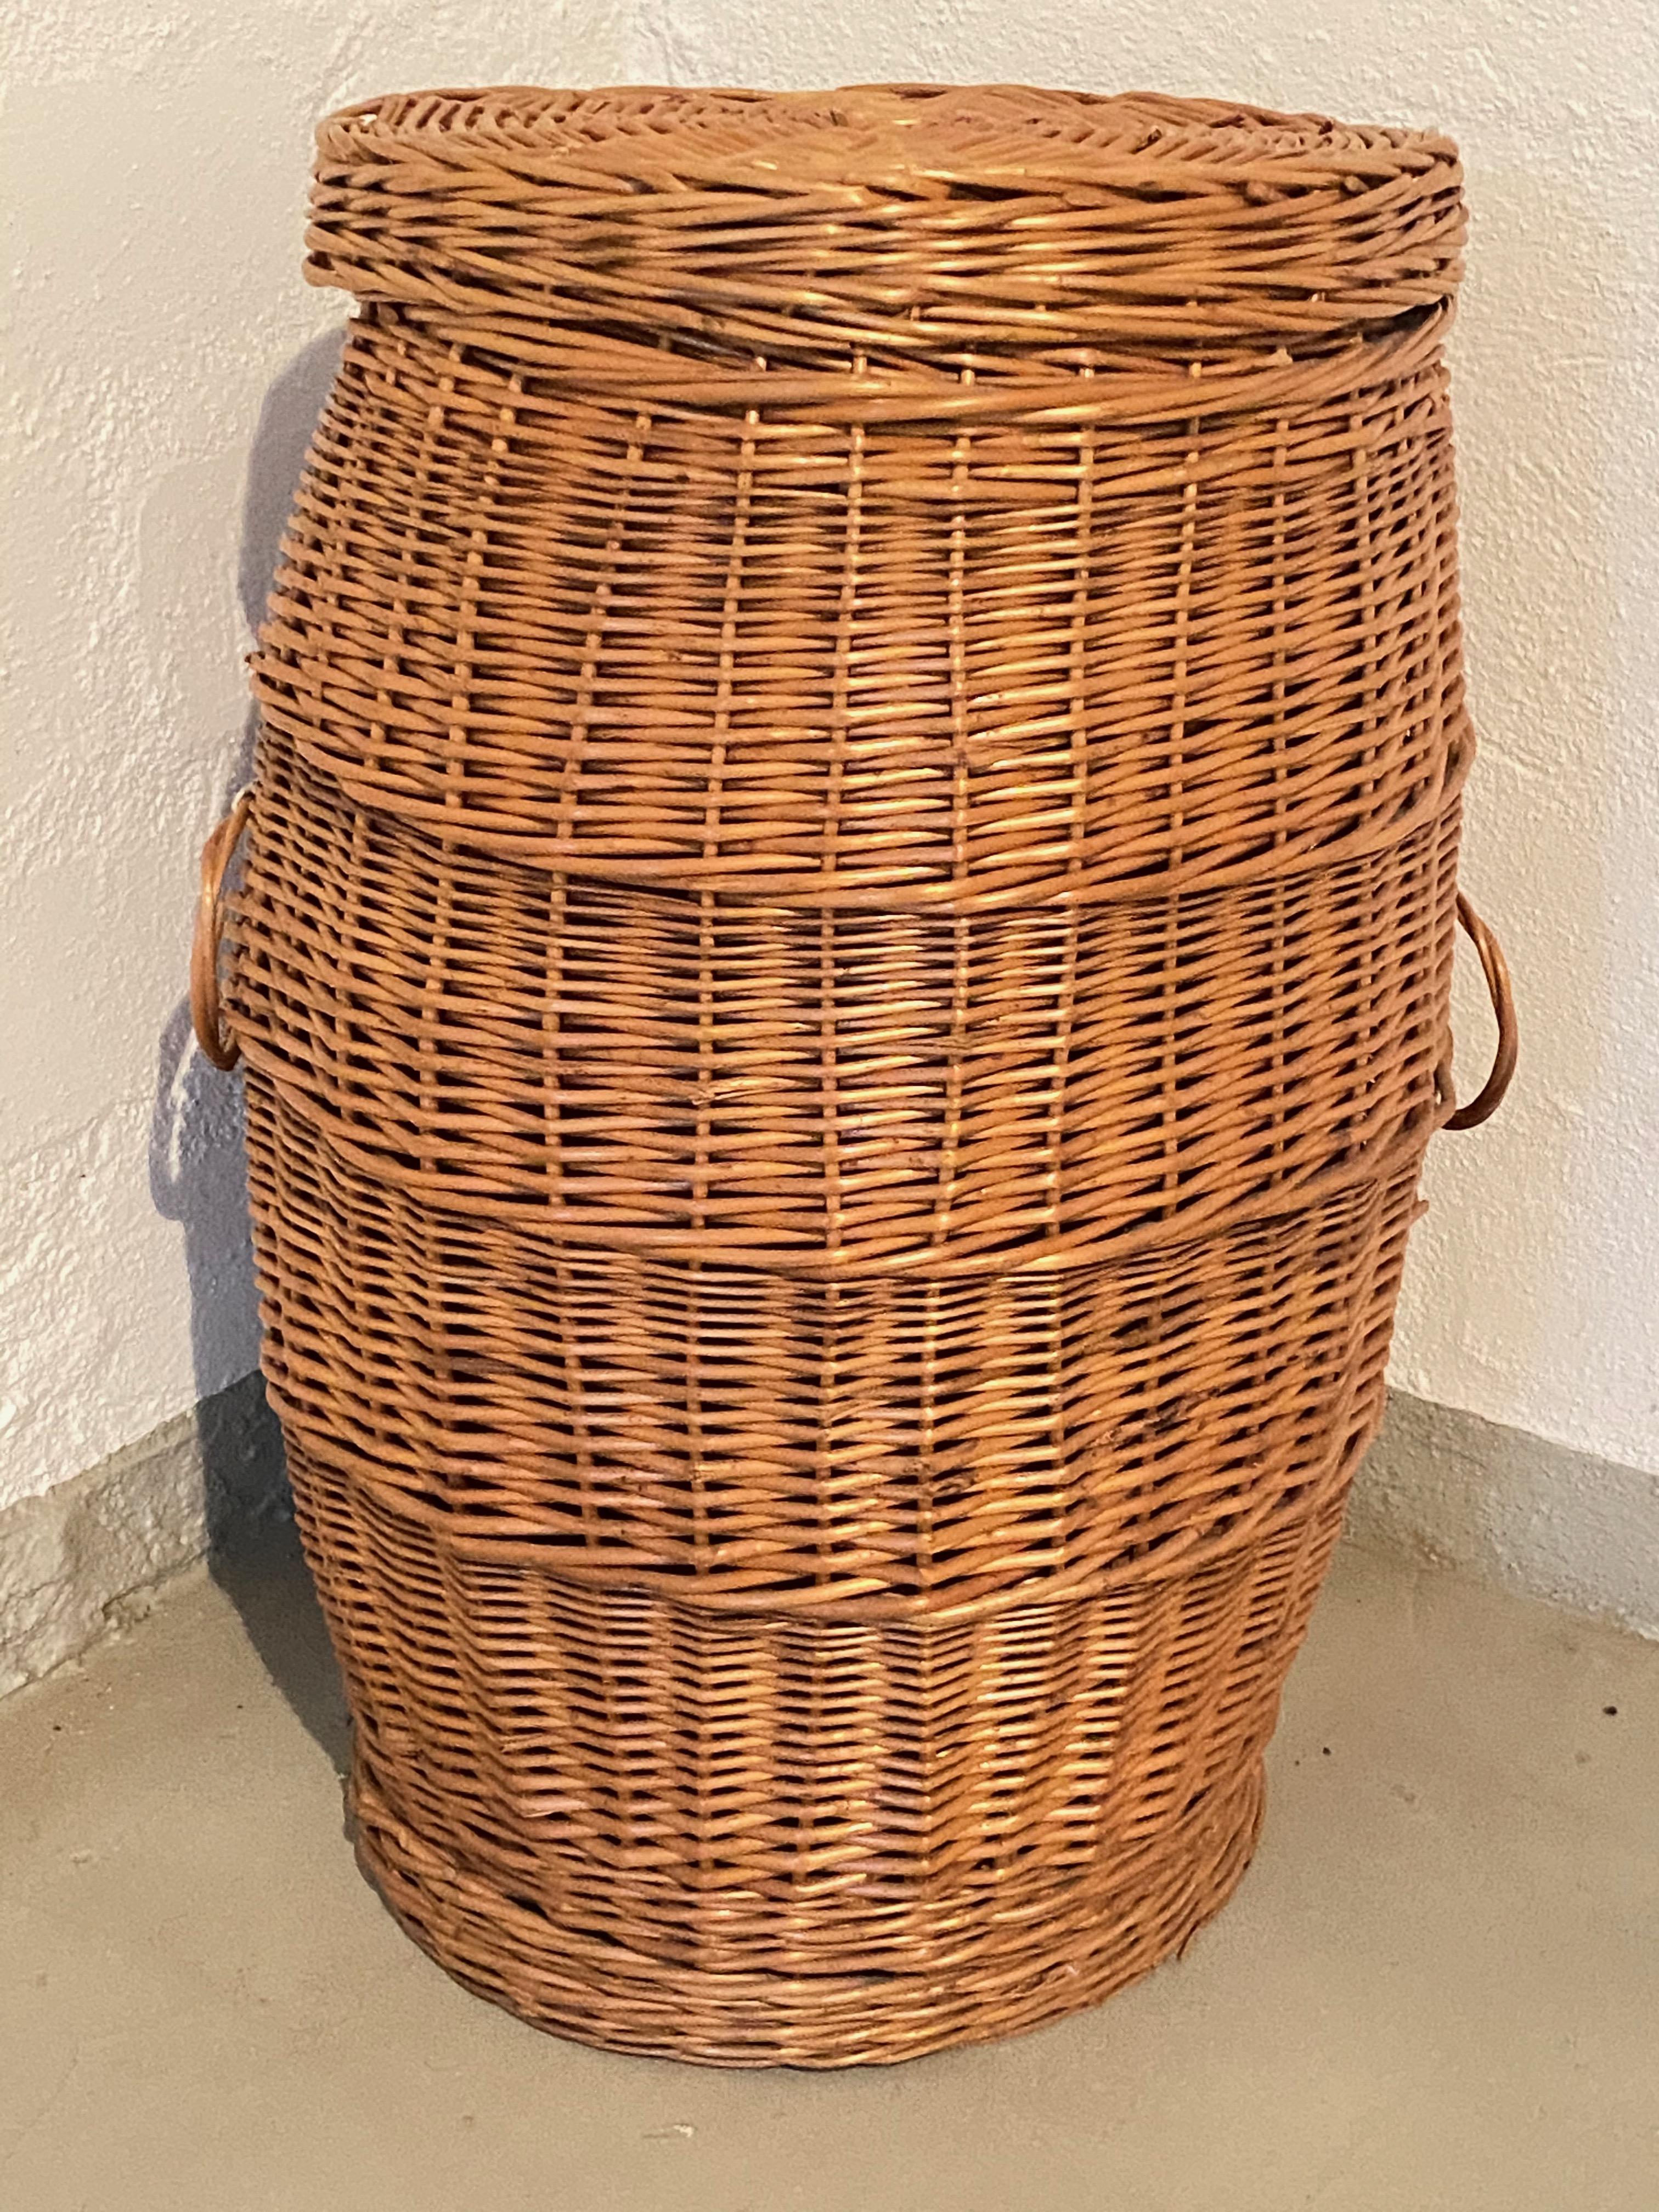 Offered is an absolutely stunning, 1970s vintage wicker laundry basket Hamper with lid and wicker handles and a wine red fabric inside. Overall very good vintage condition with light ware consistent with age and use. We believe it can also be used